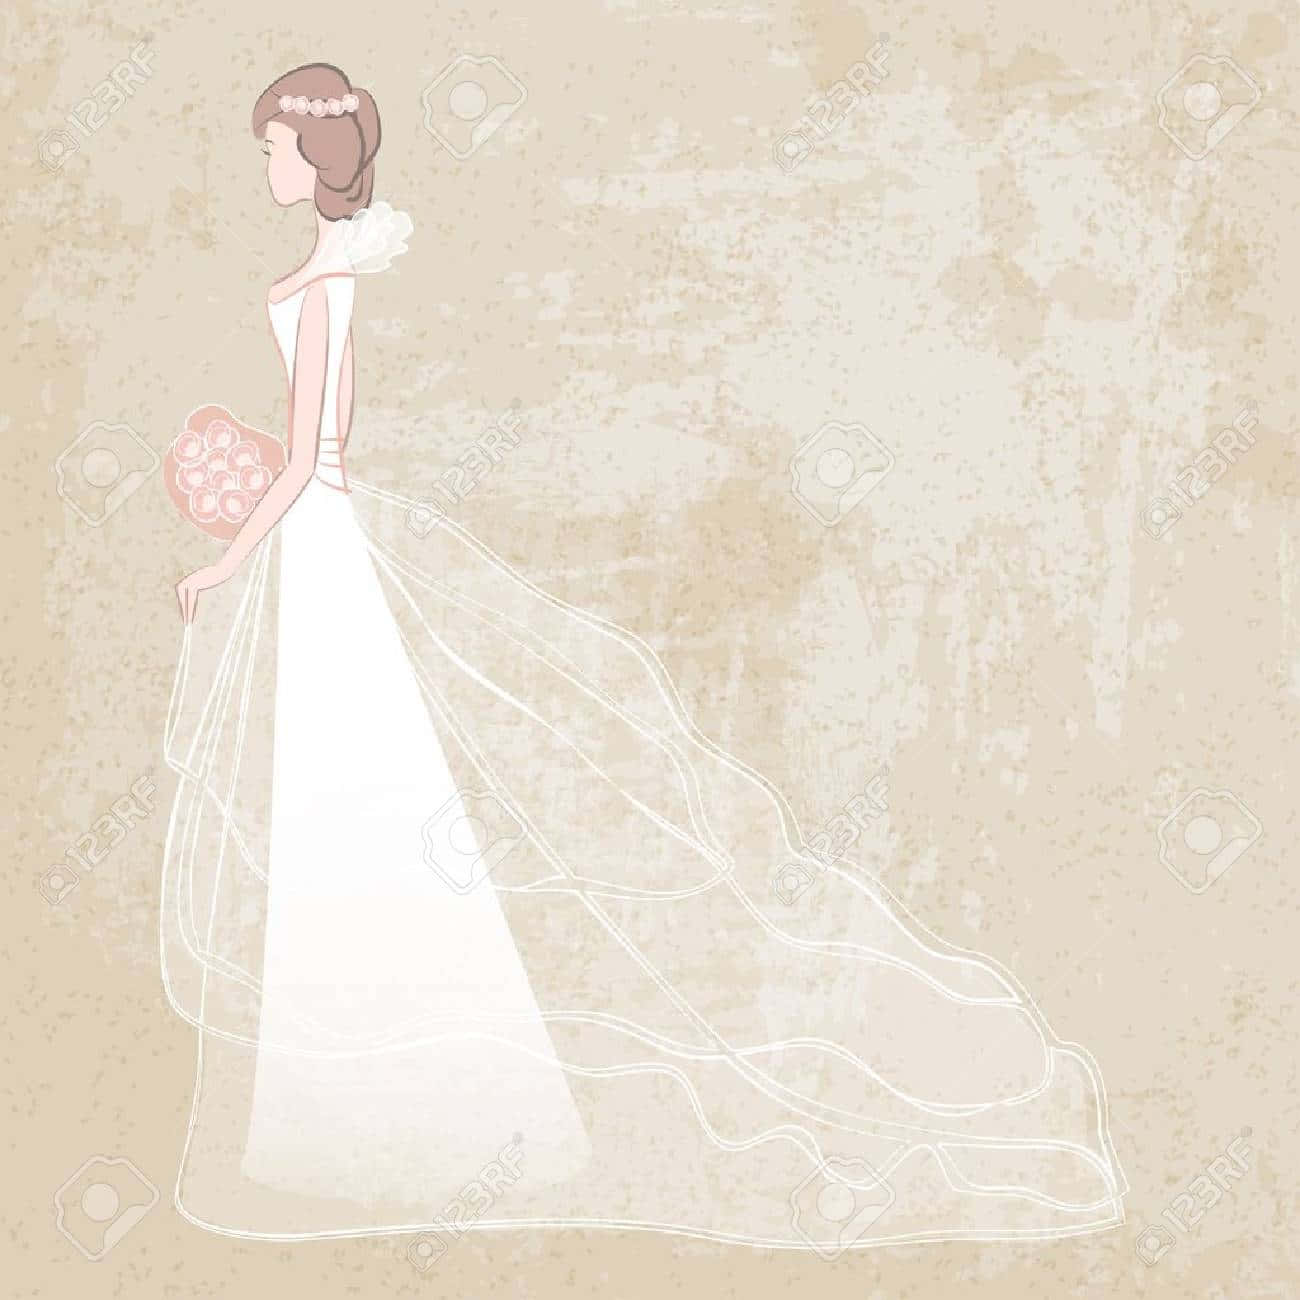 A Bride In A Wedding Dress On A Grungy Background Stock Vector - 74